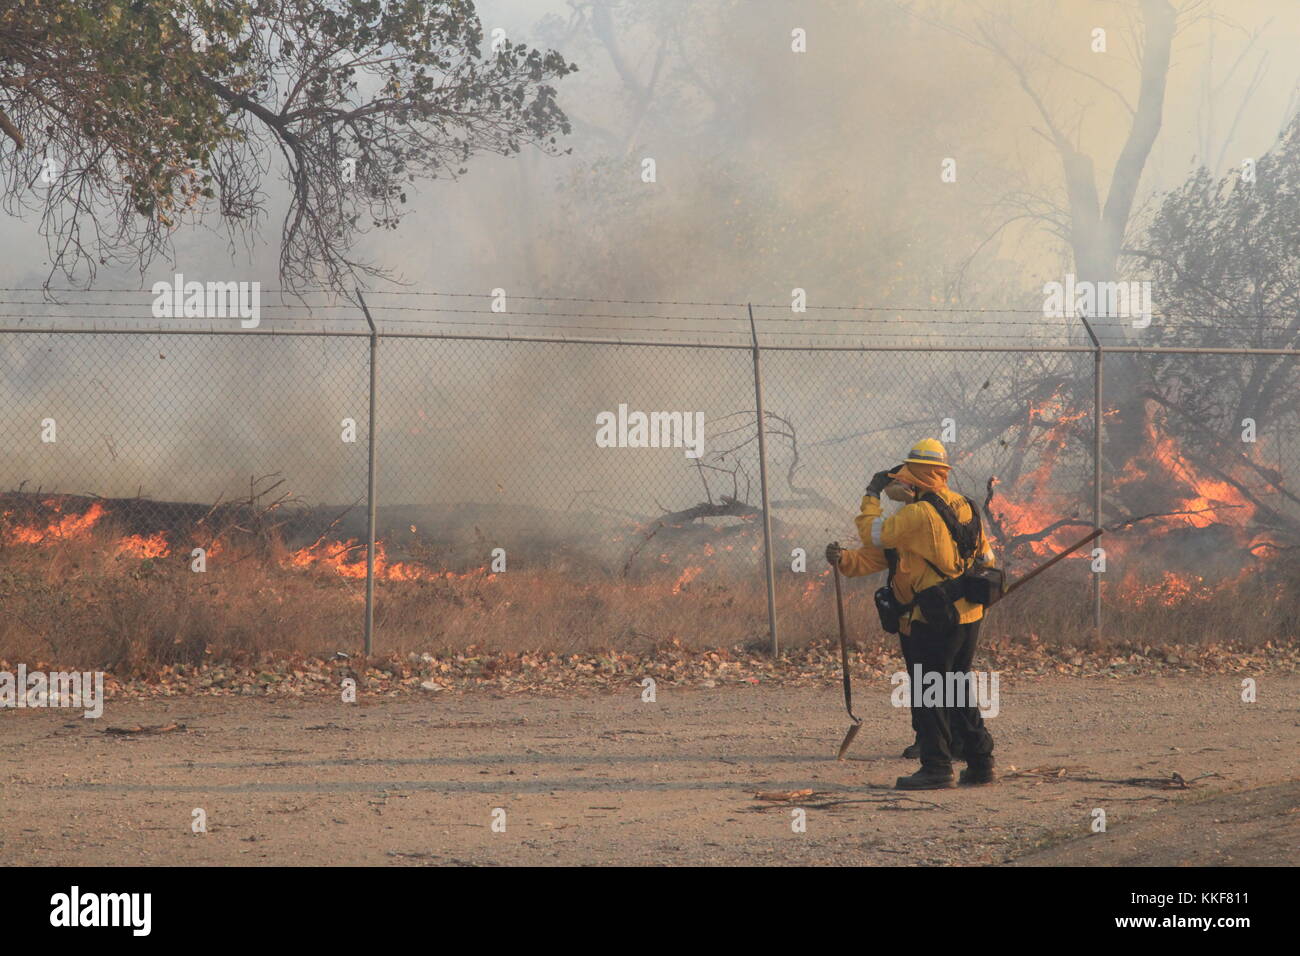 California, USA. 5th Dec, 2017. Firefighters encounter the flame in Ventura County of California, the United States, Dec. 5, 2017. Brush fires across the region were fed by extremely high winds, low humidities and dry fuel. Hundreds of fire fighters have been working very hard to minimize damage to property and evacuations are taking place in many places in south California, said authorities. Credit: Huang Heng/Xinhua/Alamy Live News Stock Photo